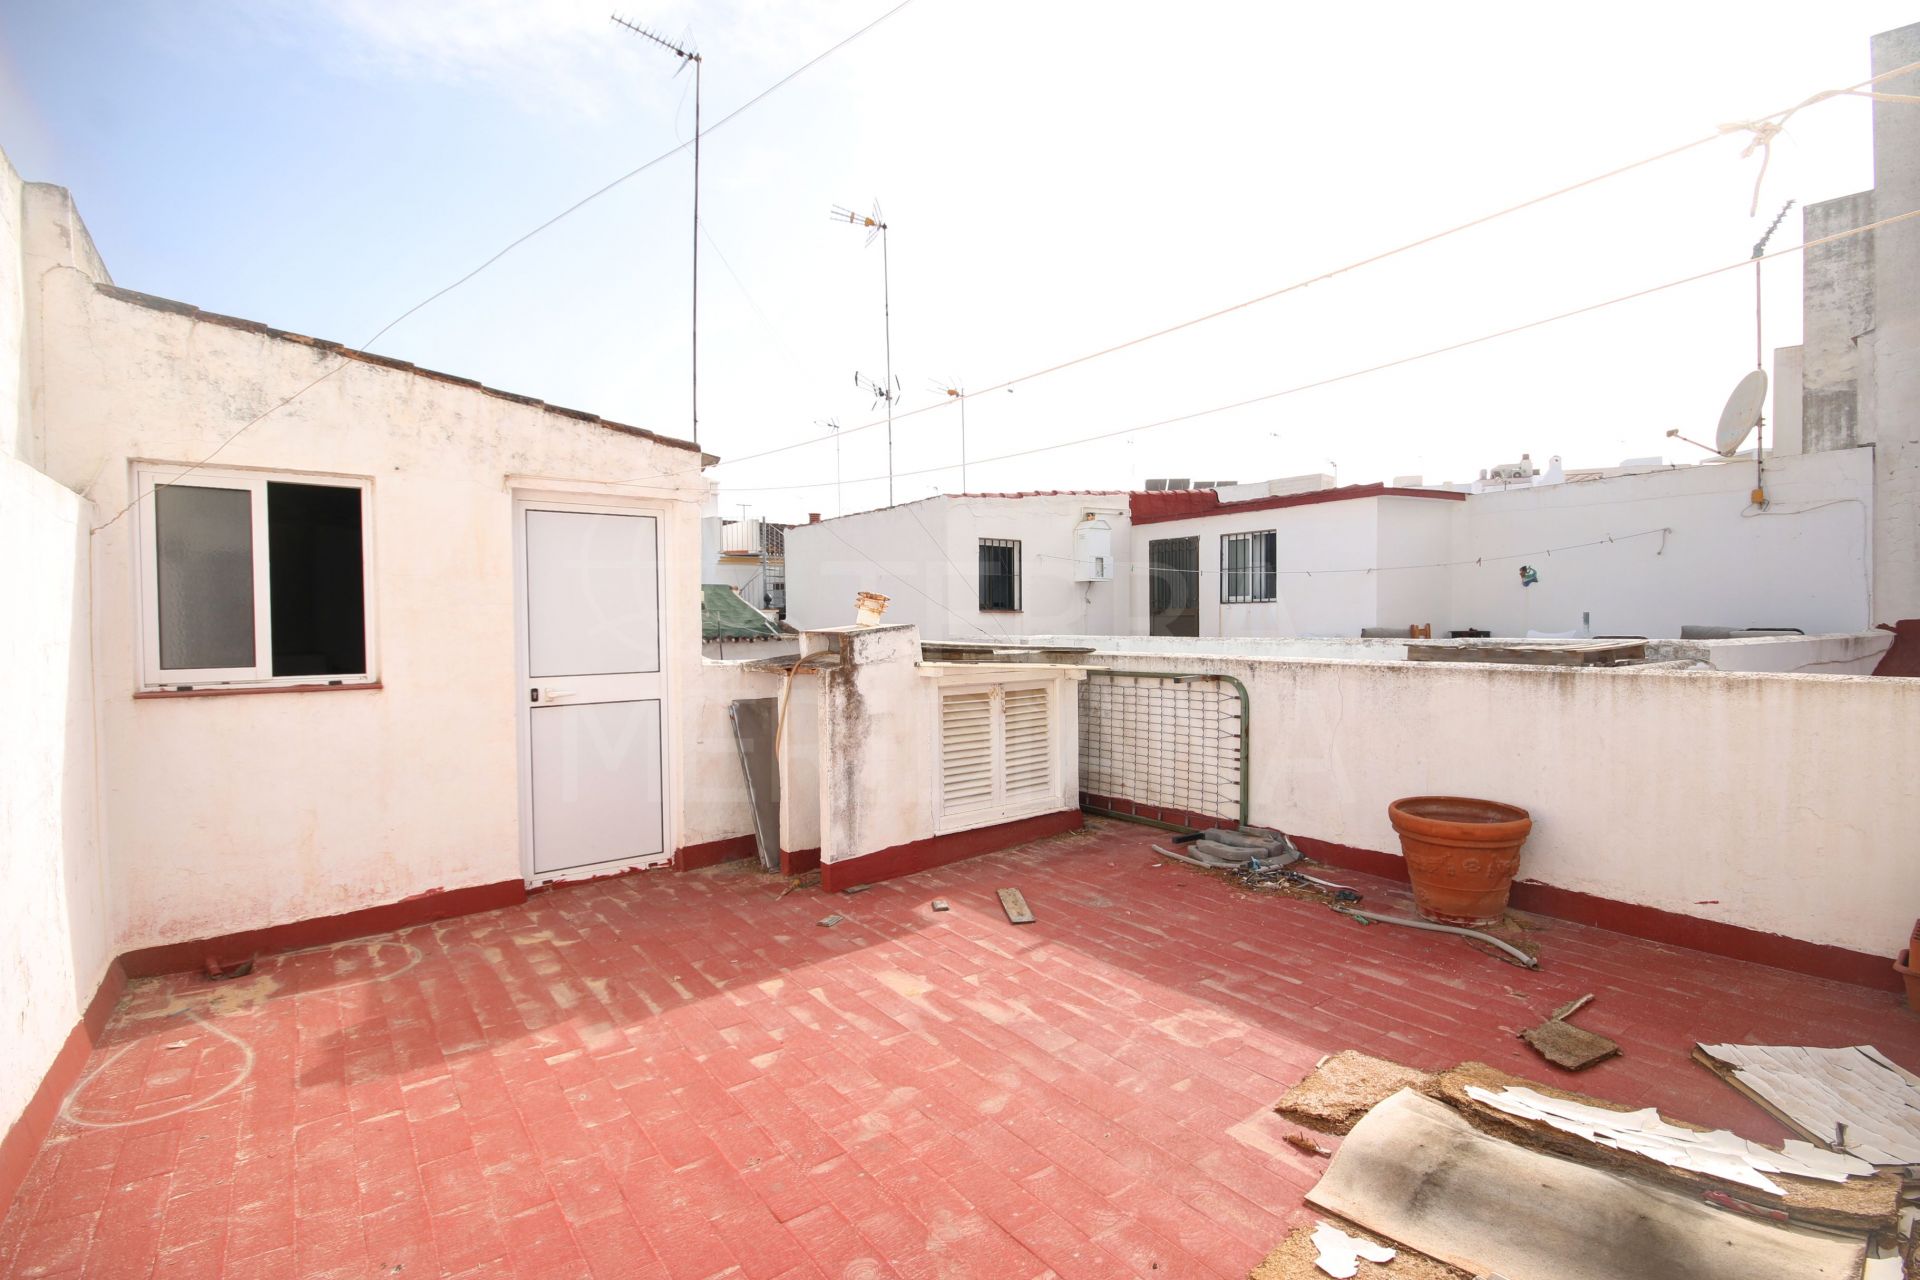 Townhouse to reburfish for sale in Estepona old town